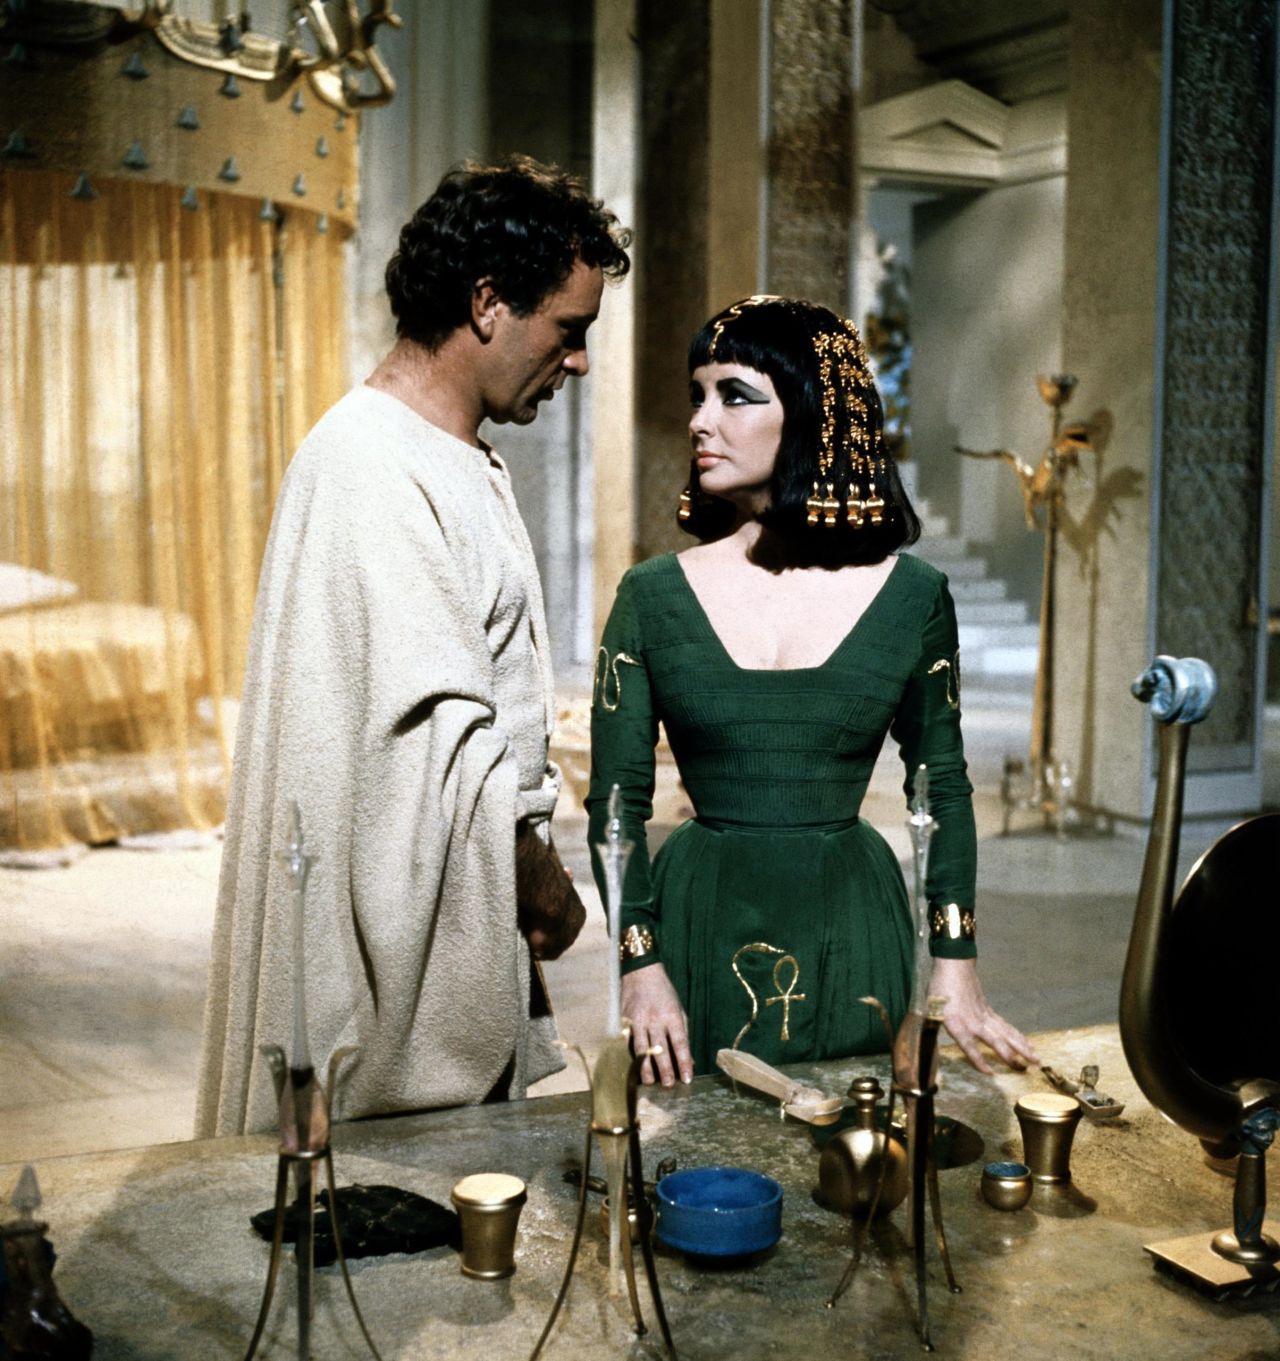 Elizabeth Taylor as Cleopatra with Richard Burton as Marc Anthony in 1963's "Cleopatra."